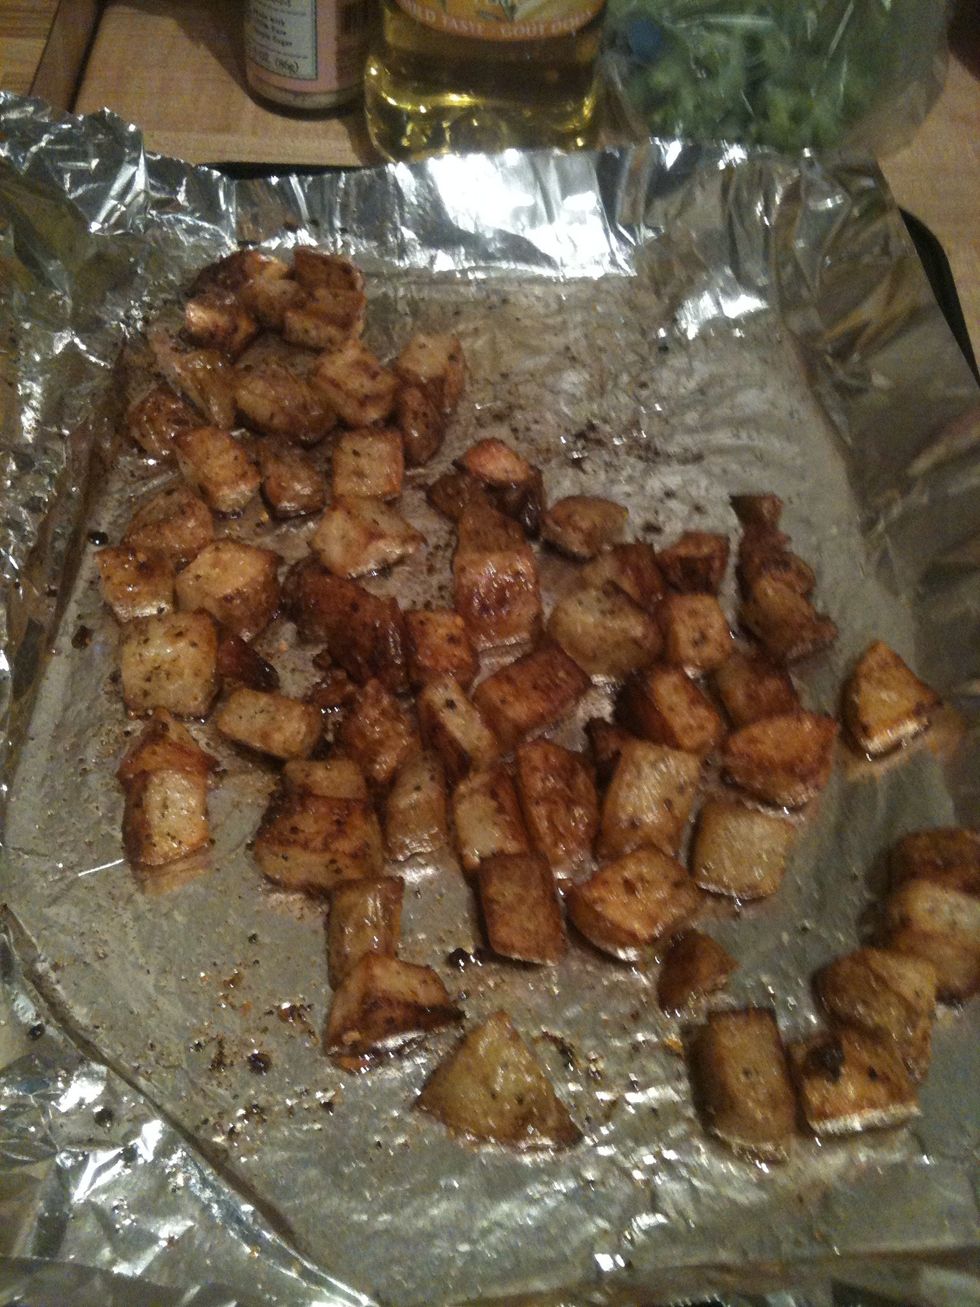 How Long To Bake Potatoes At 375 Wrapped In Foil